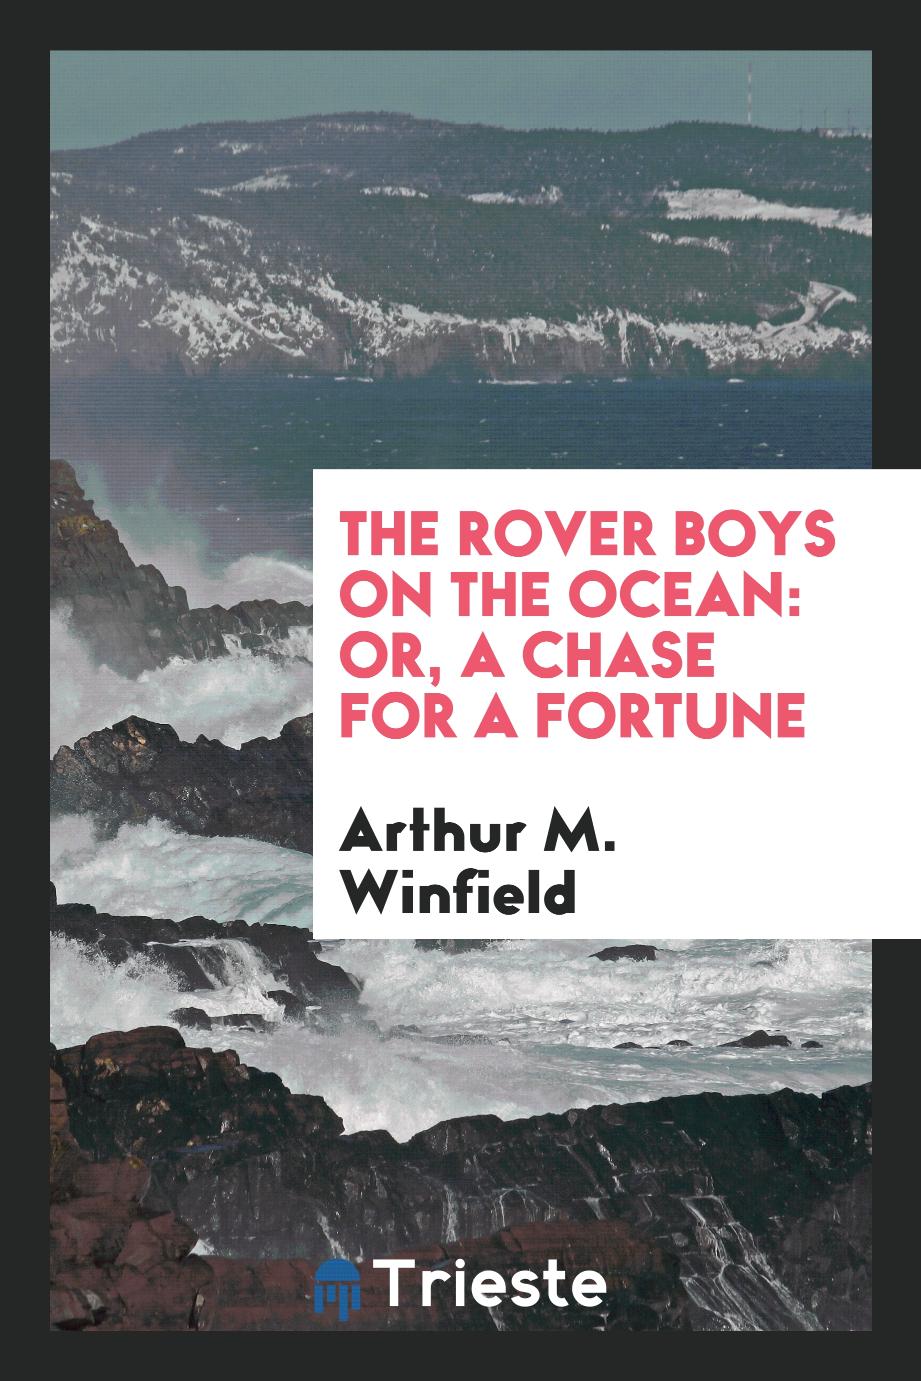 The Rover boys on the ocean: or, a chase for a fortune